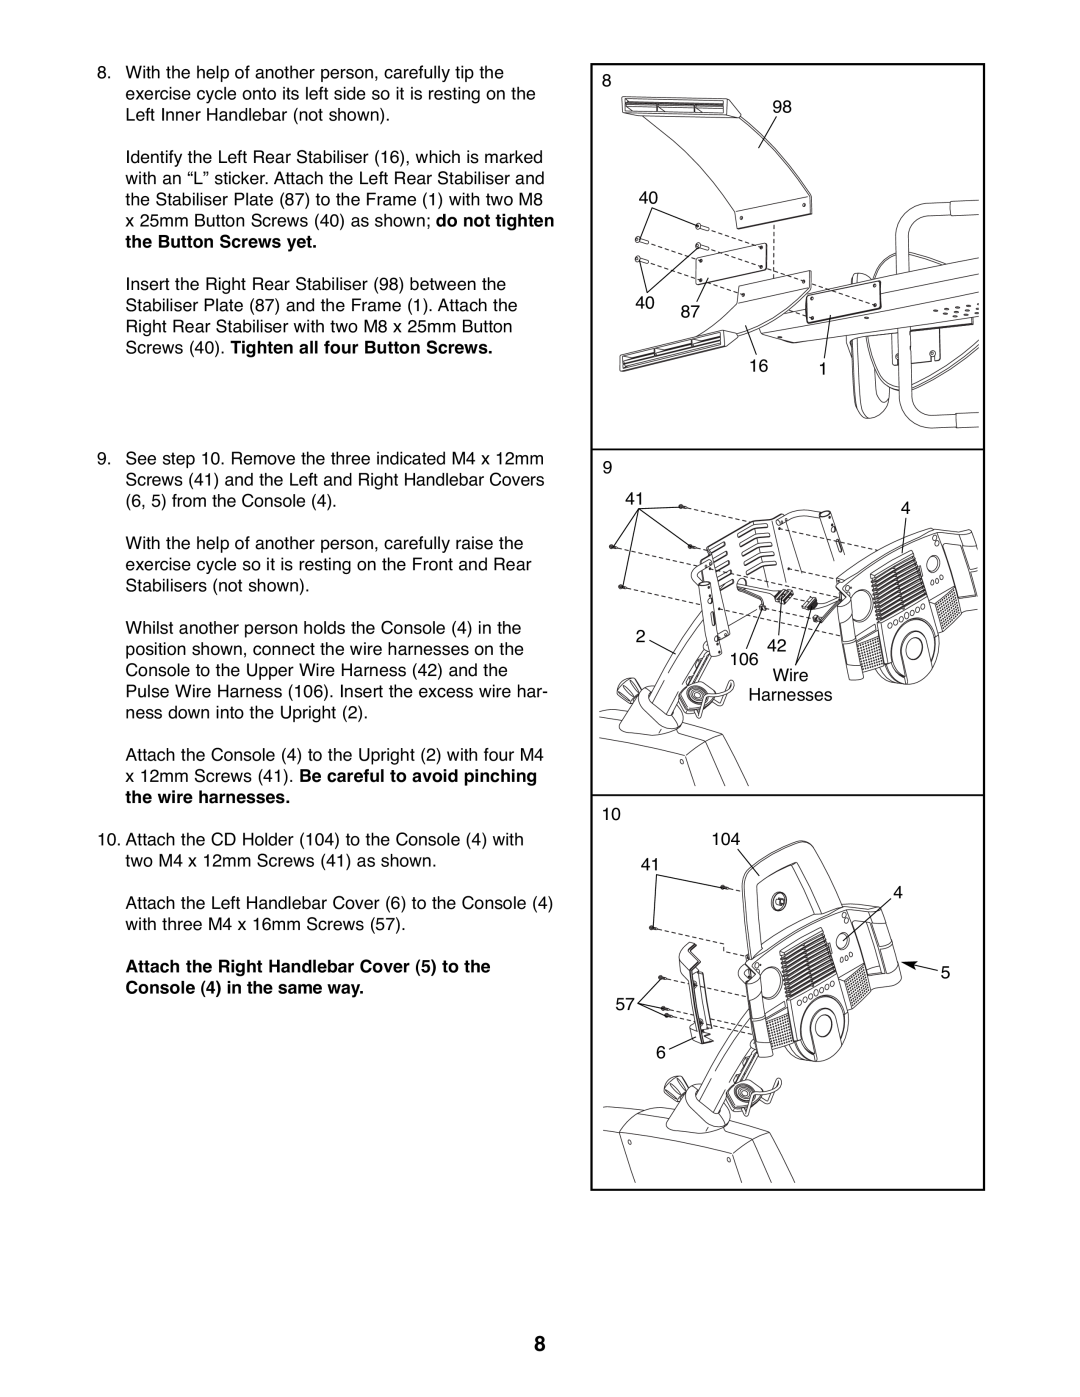 ProForm PFEVEX62832 user manual Attach the Right Handlebar Cover 5 to the Console 4 in the same way 